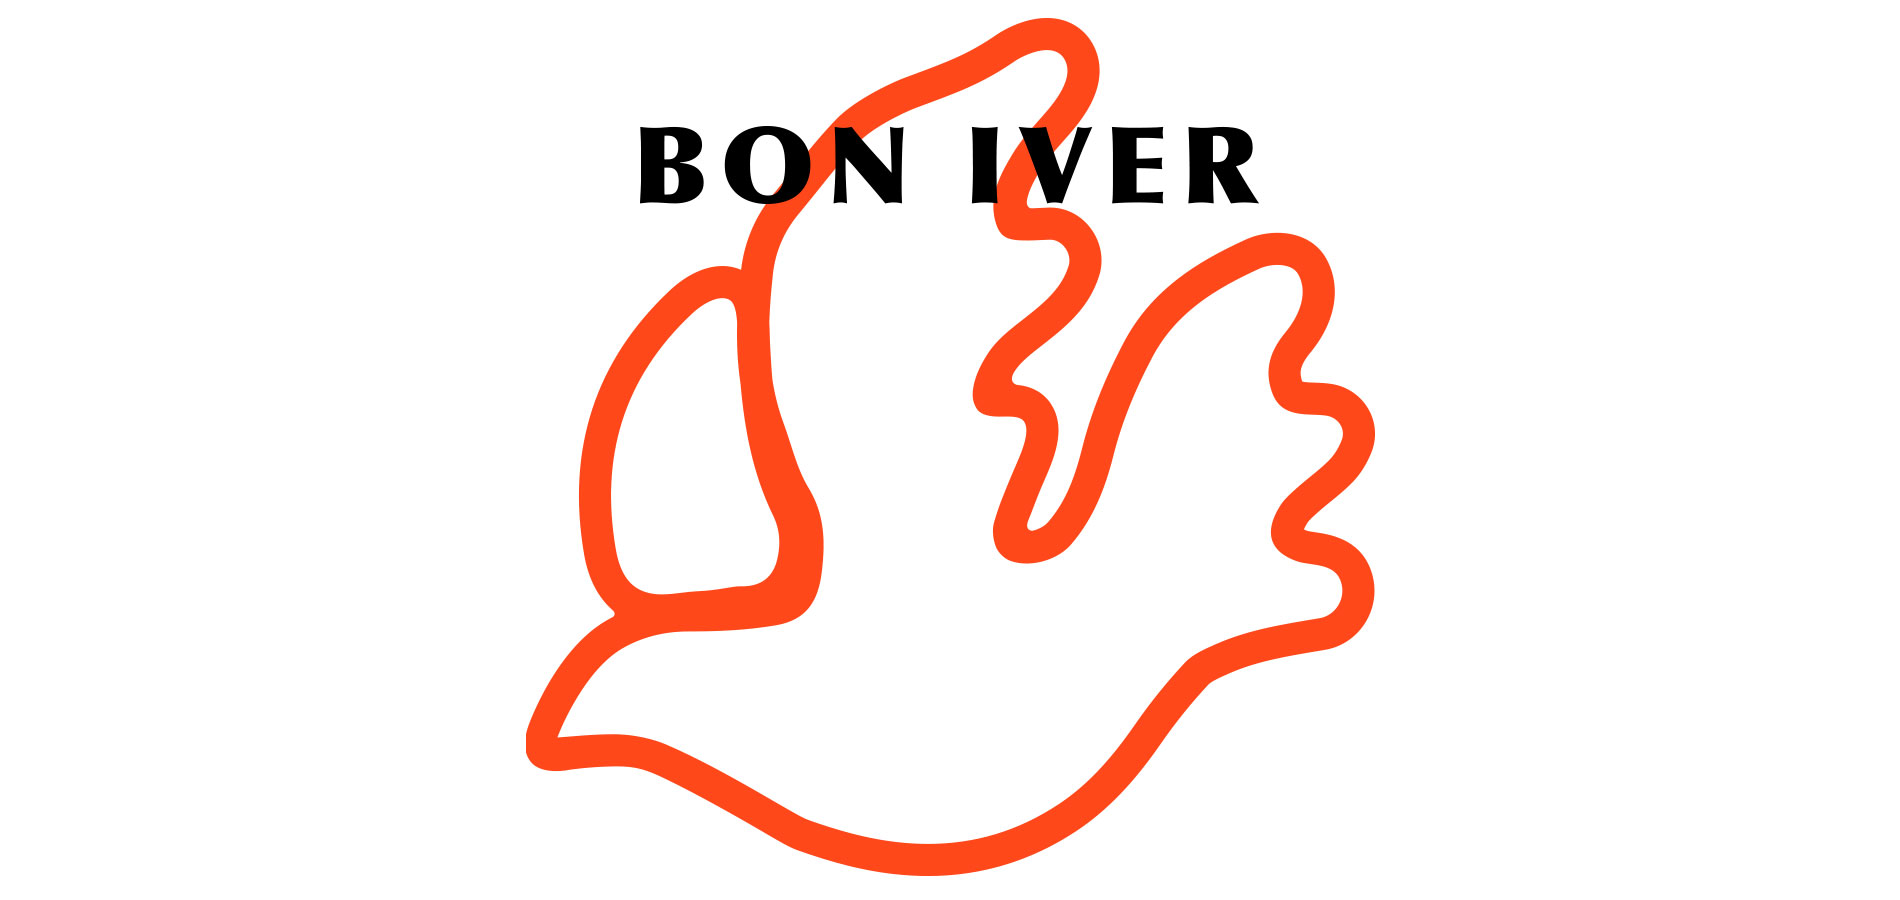 WXPN Welcomes: An Evening With Bon Iver